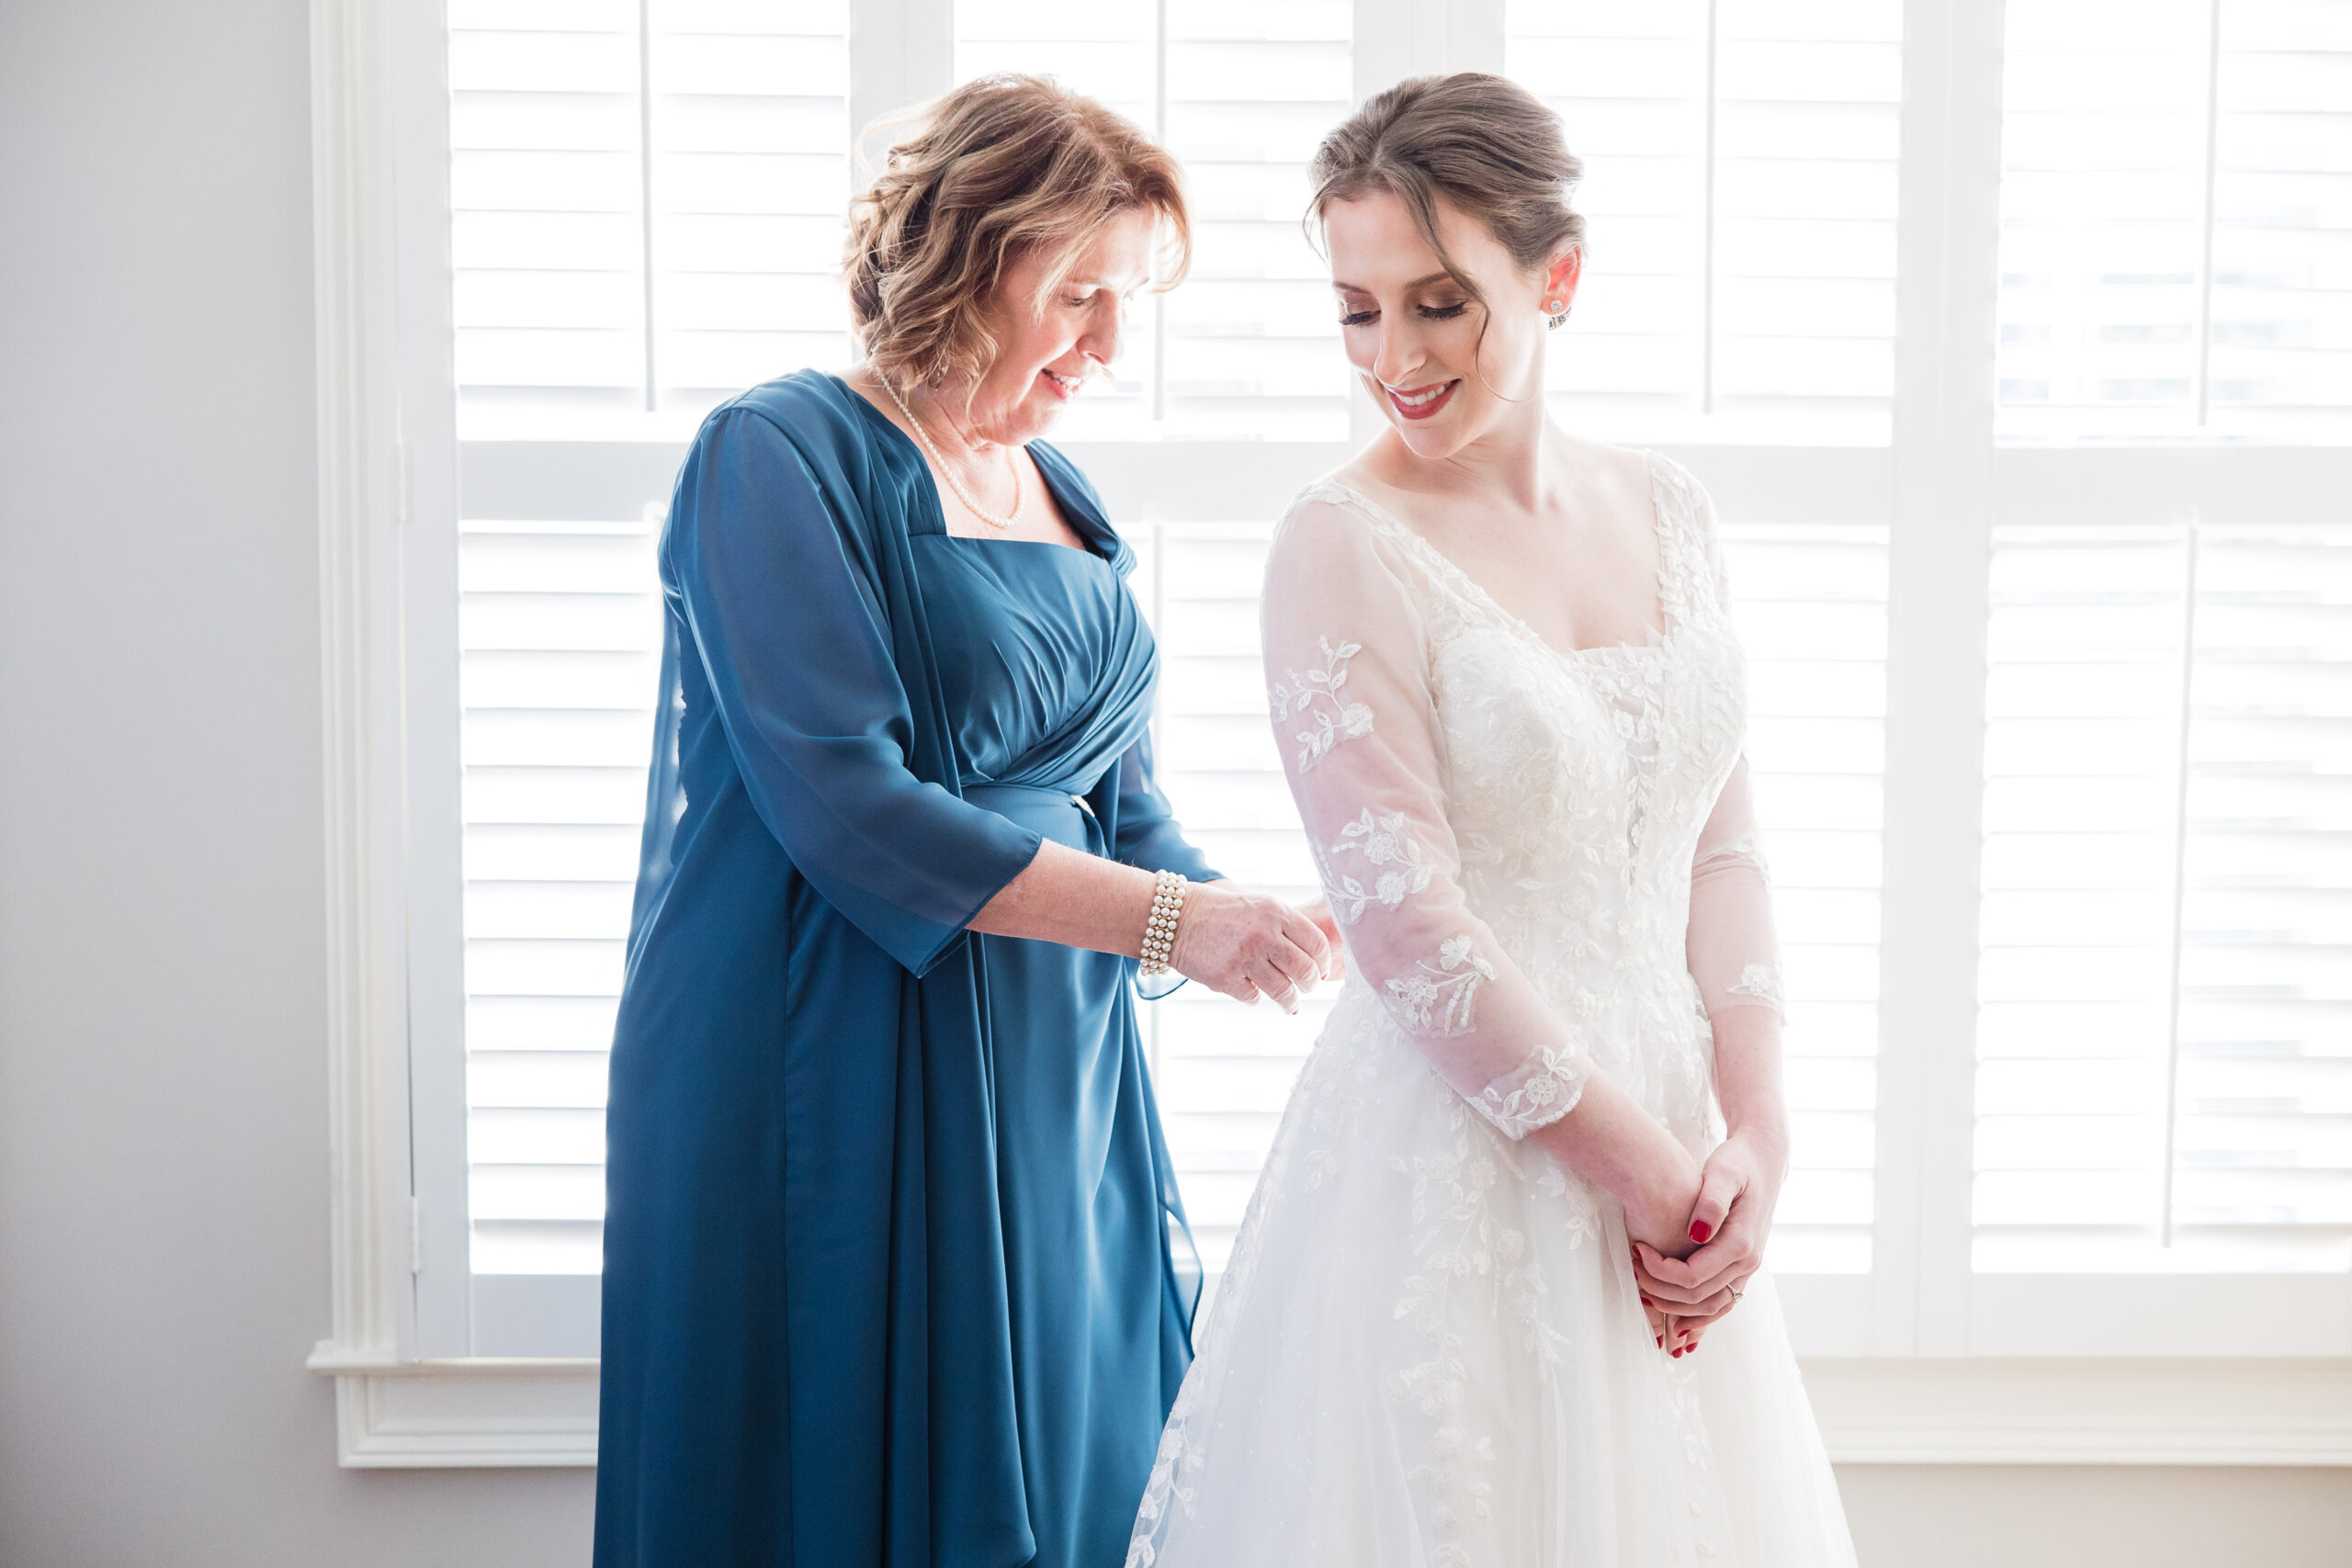 Mother of the bride helping the bride with her dress as she gets ready